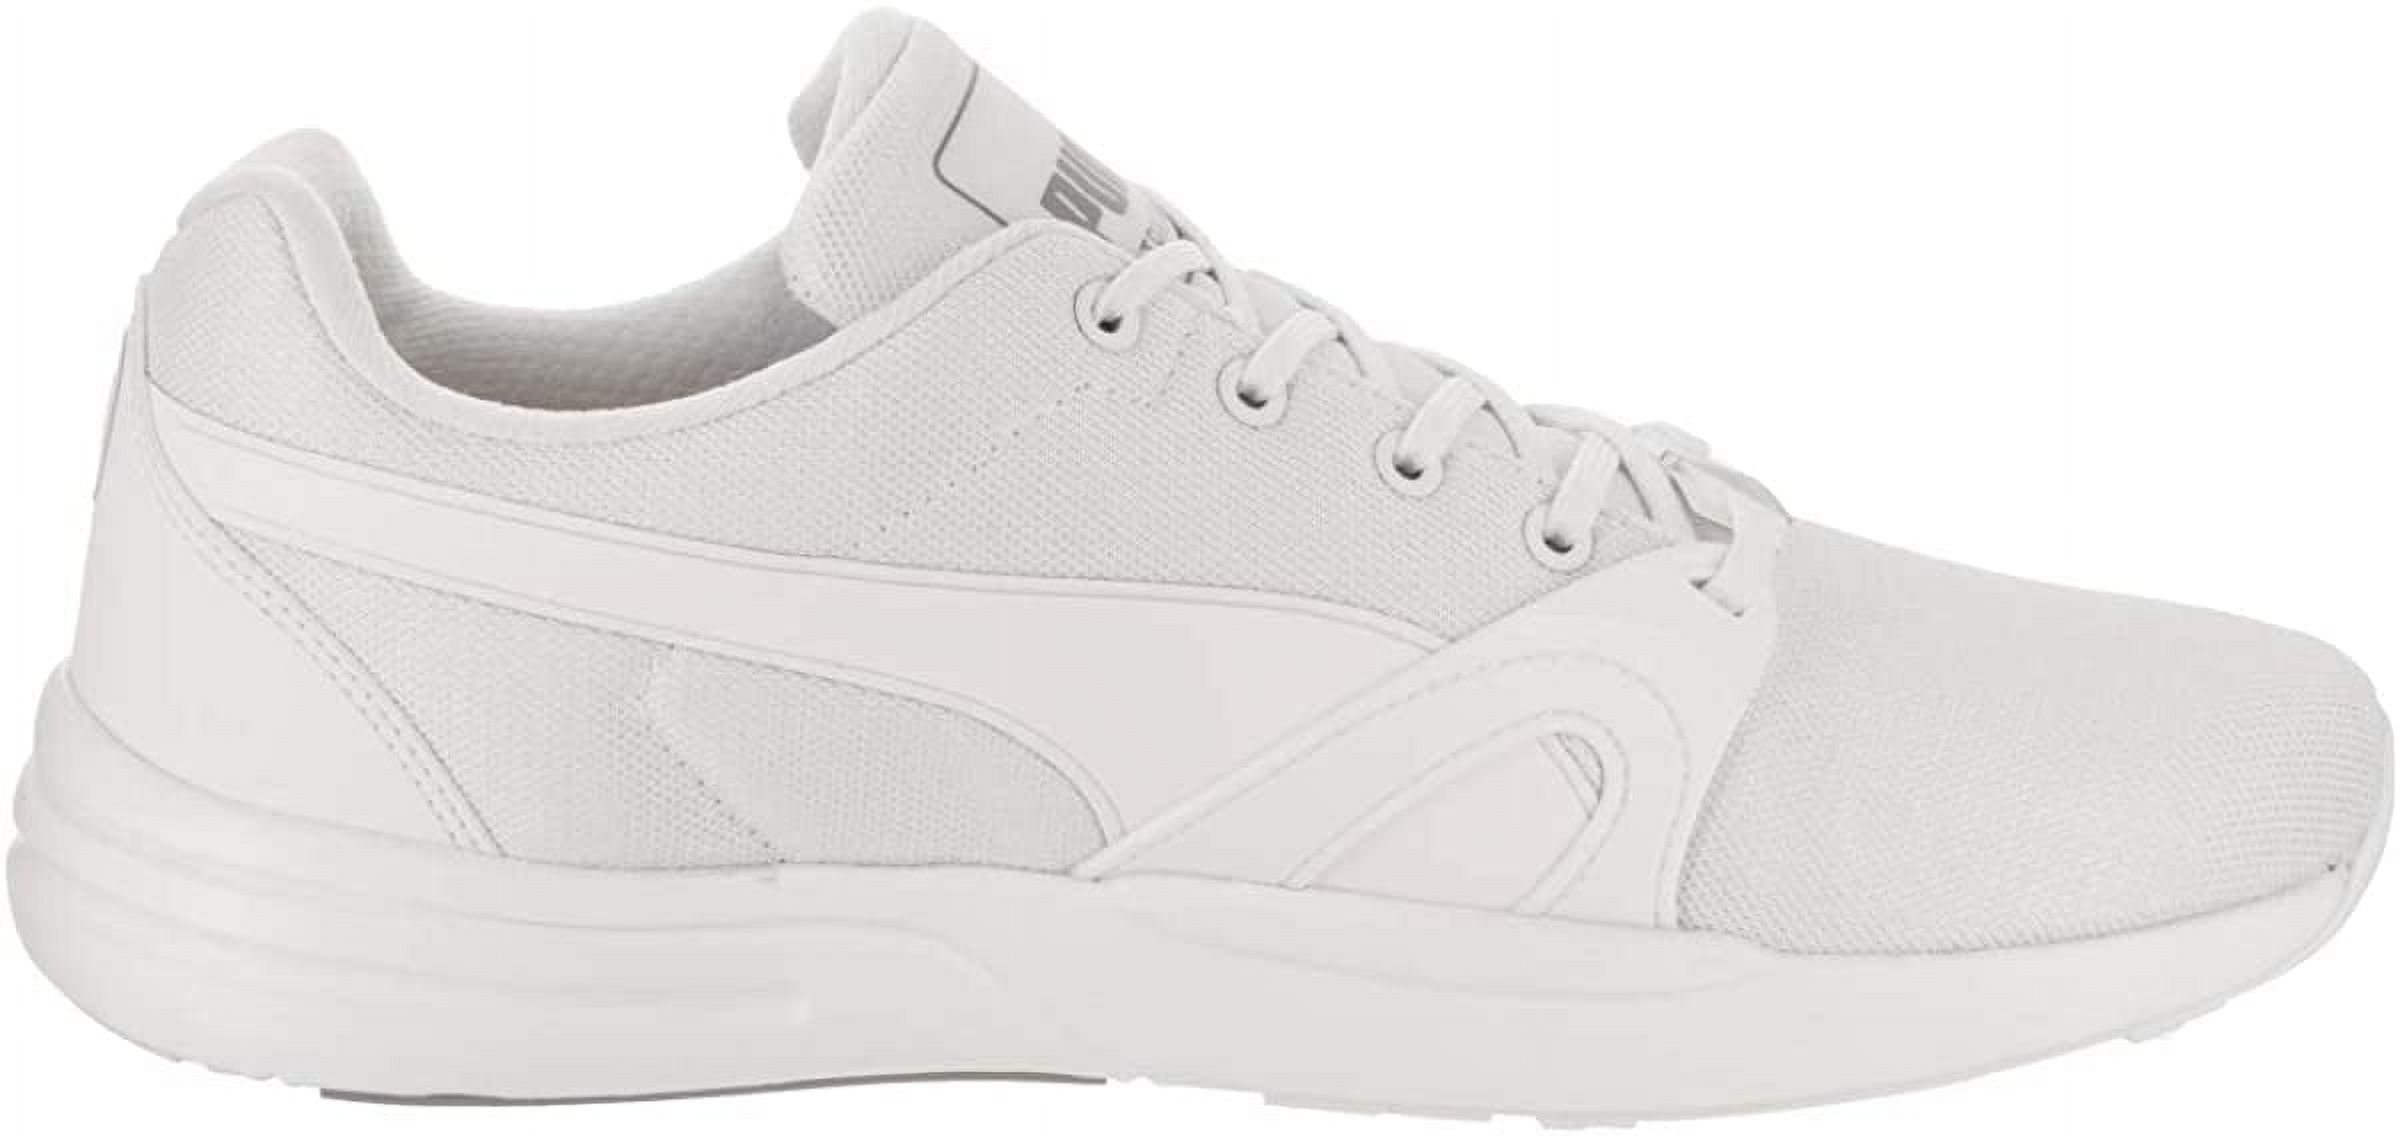 Puma Men's XT S Running Casual Walking Sneakers Shoes, 2 Colors - image 5 of 5